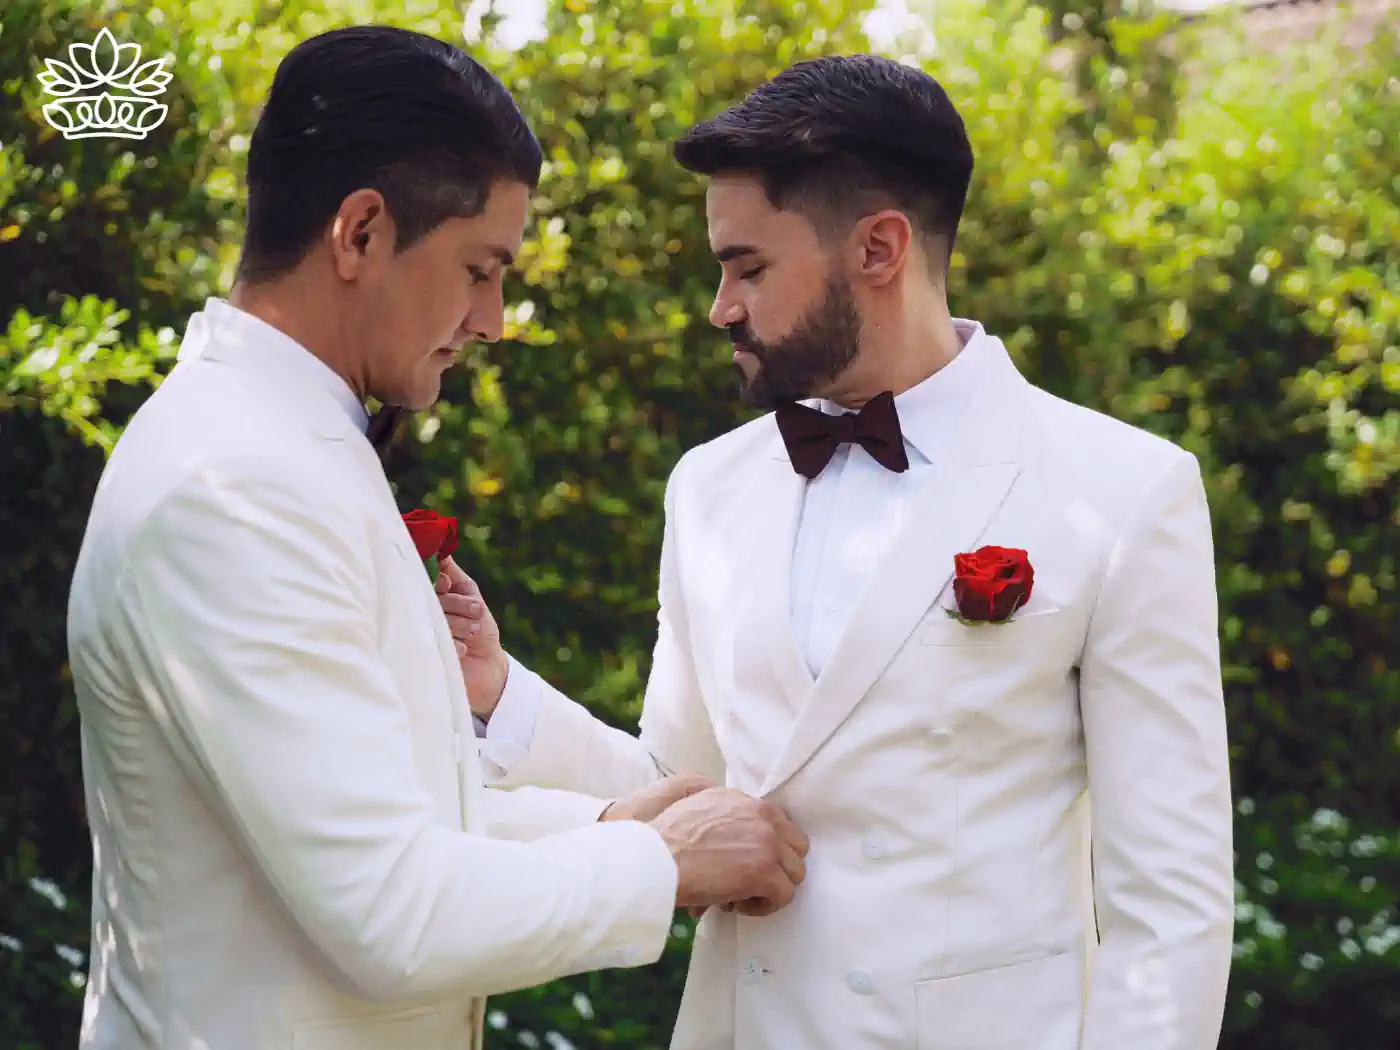 Two men in white suits adjusting each other's jackets, preparing for a wedding. Fabulous Flowers and Gifts - Pride Collection.